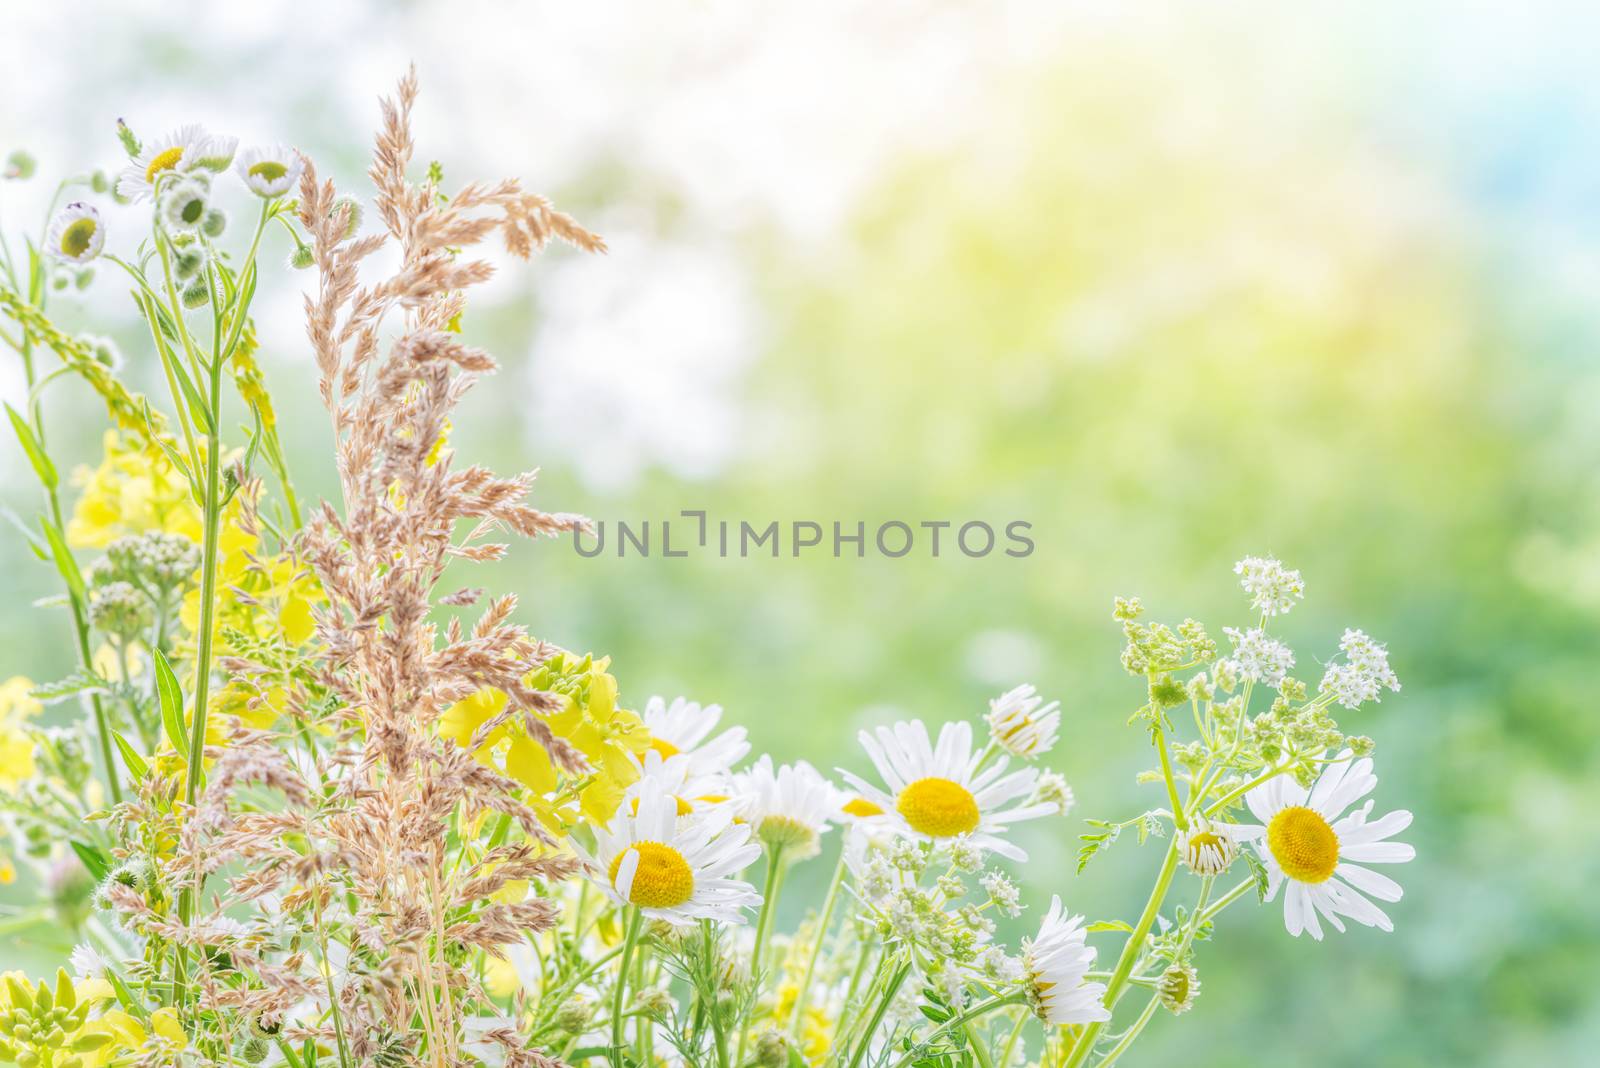 Bouquet of different multicolored wildflowers closeup outdoors